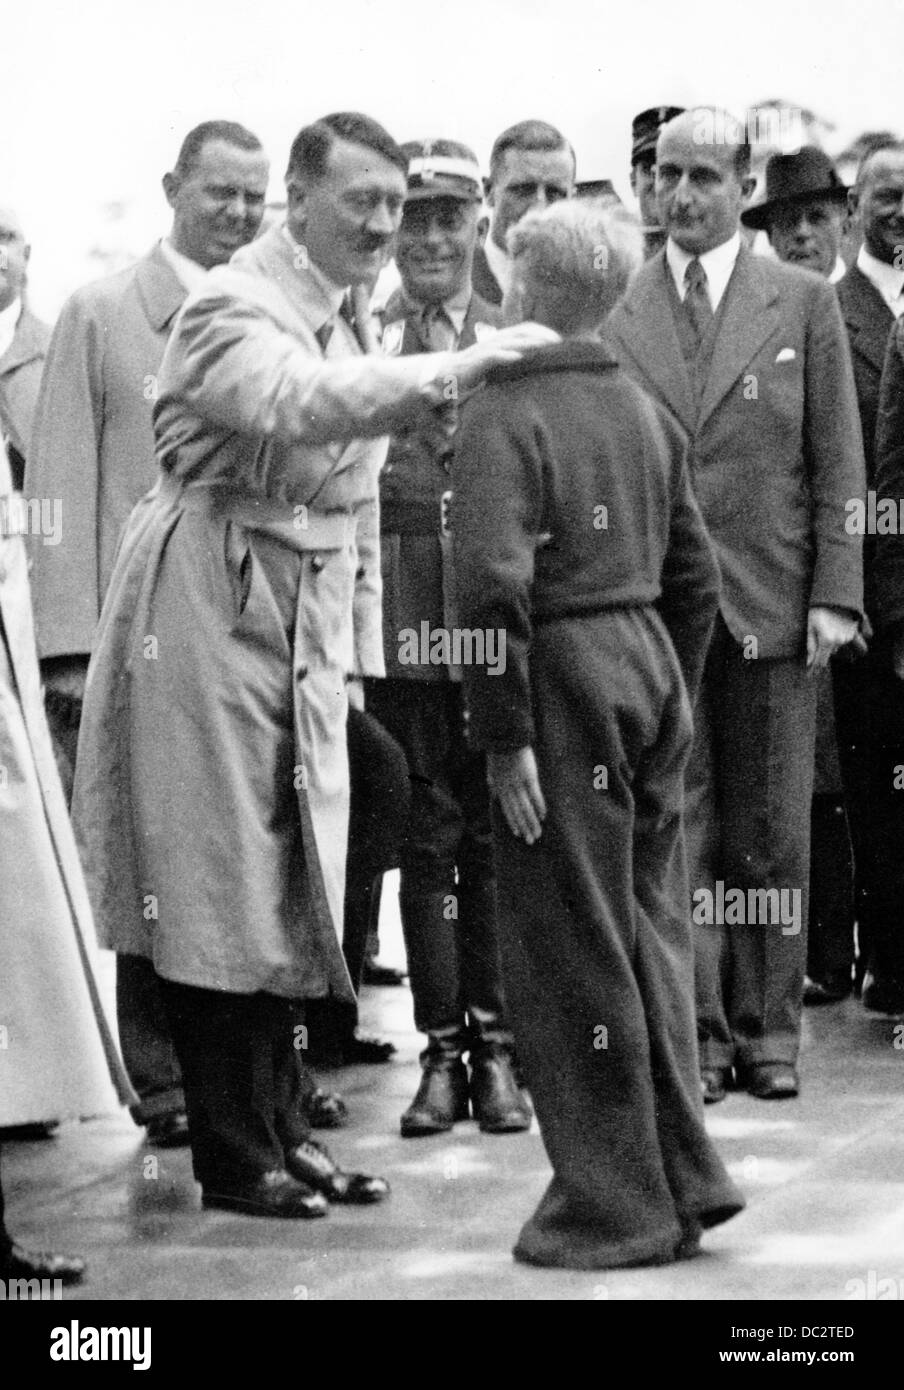 The image from the Nazi Propaganda! shows Adolf Hitler as he talks to a boy who participates in Olympic preparationg on the Reich sports field in Berlin, Germany, in 1933. Fotoarchiv für Zeitgeschichte Stock Photo